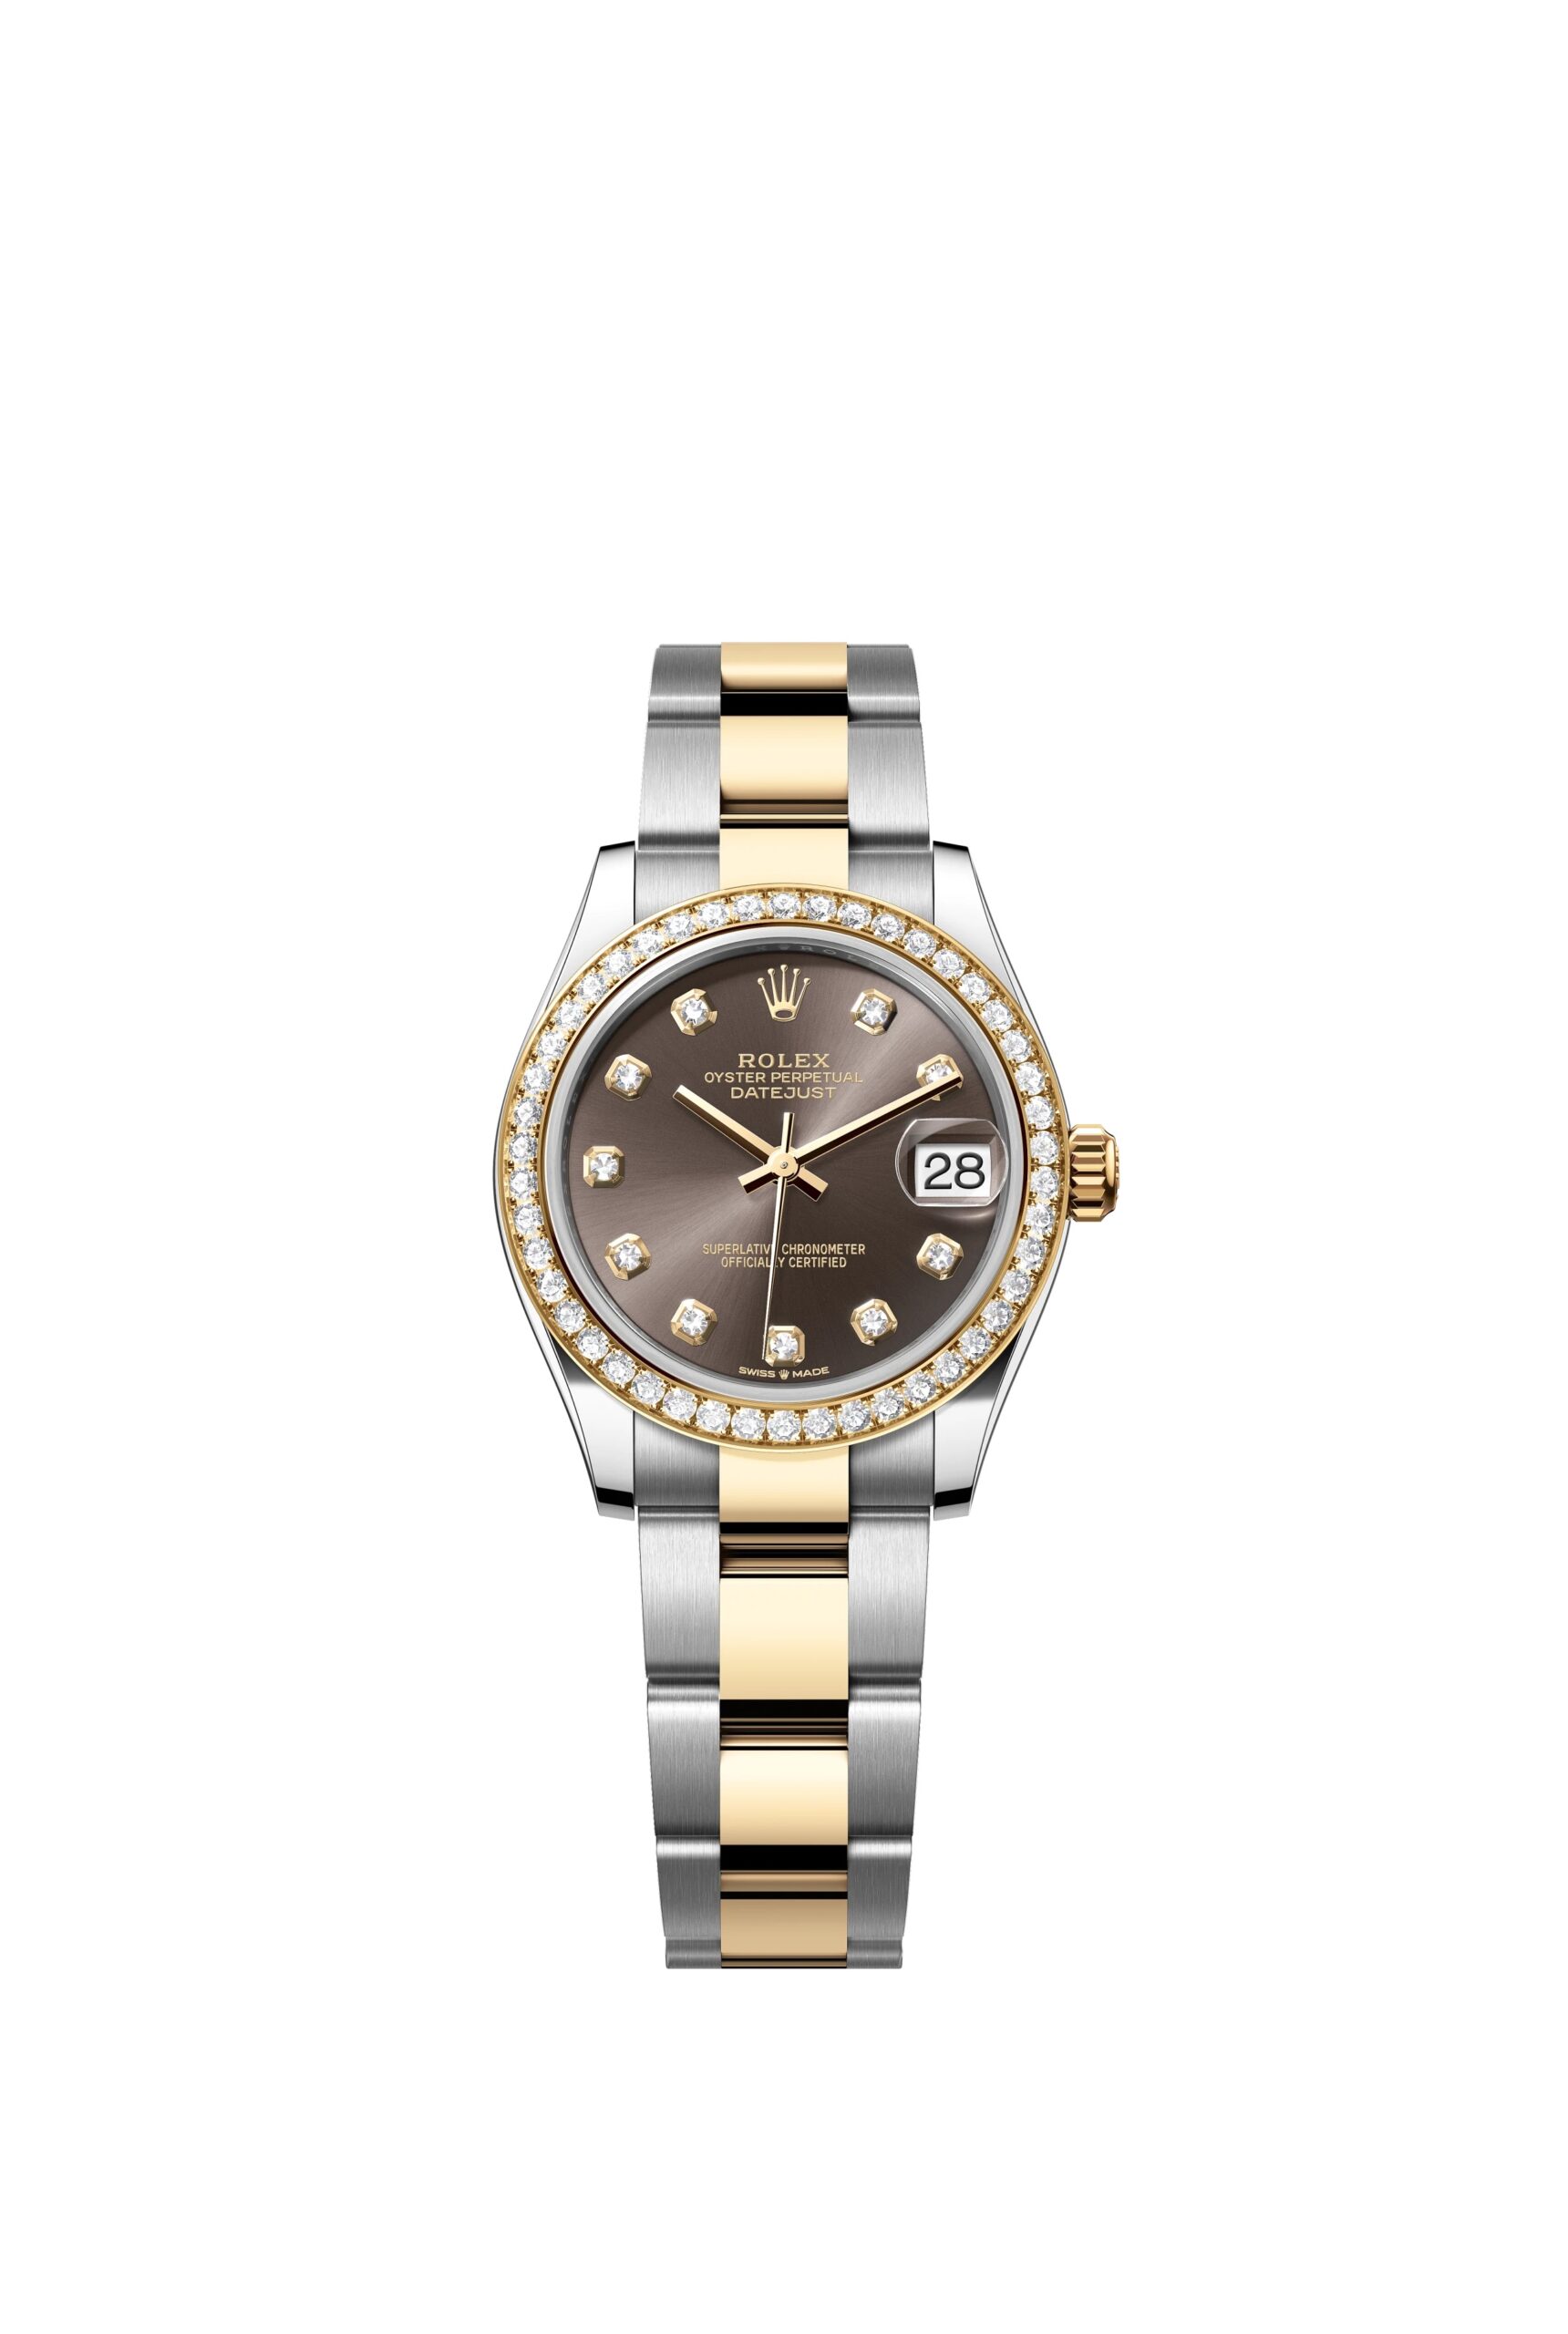 Rolex Datejust 31 Oyster, 31 mm, Oystersteel, yellow gold and diamonds Reference 278383RBR